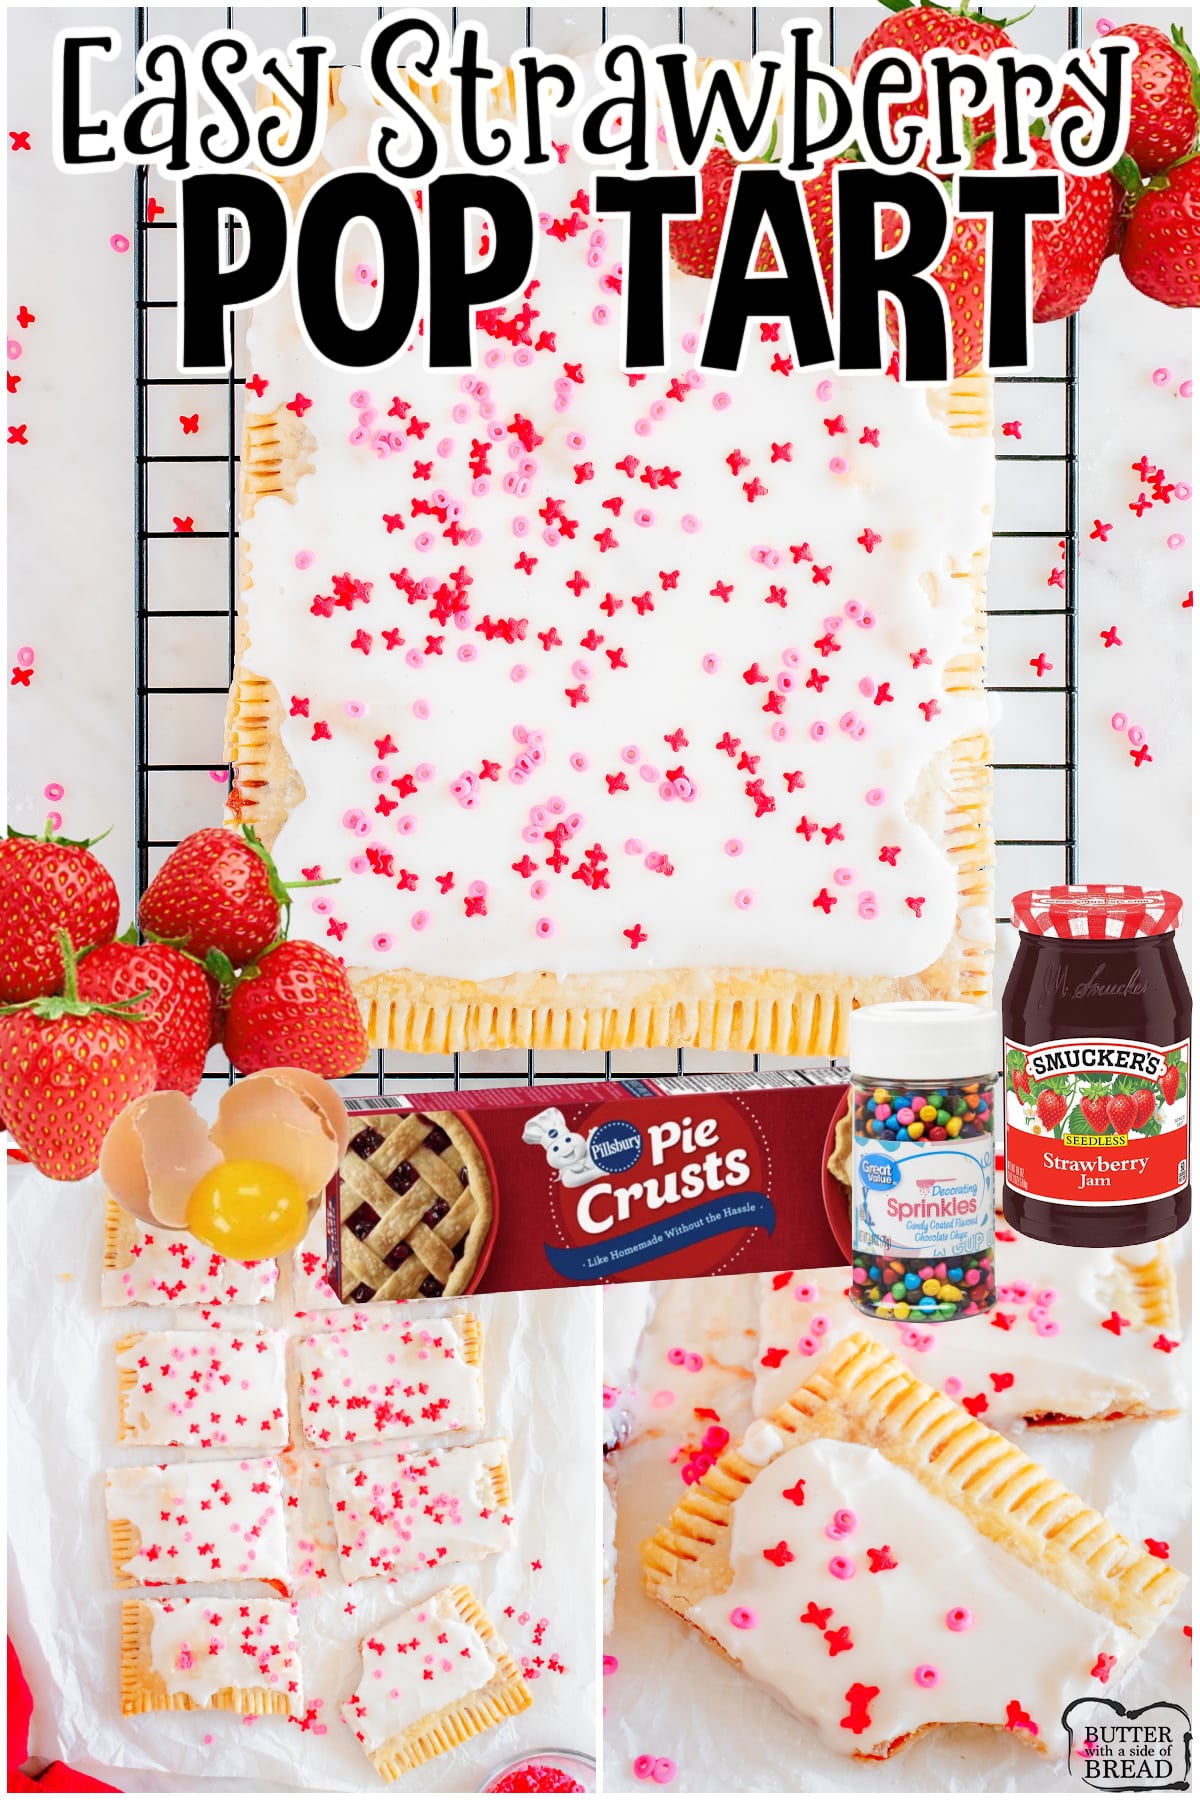 Nostalgic Strawberry Pop Tart made easy at home with just a handful of ingredients! Sweet strawberry jam is baked between layers of pie crust & topped with a simple vanilla glaze & sprinkles!